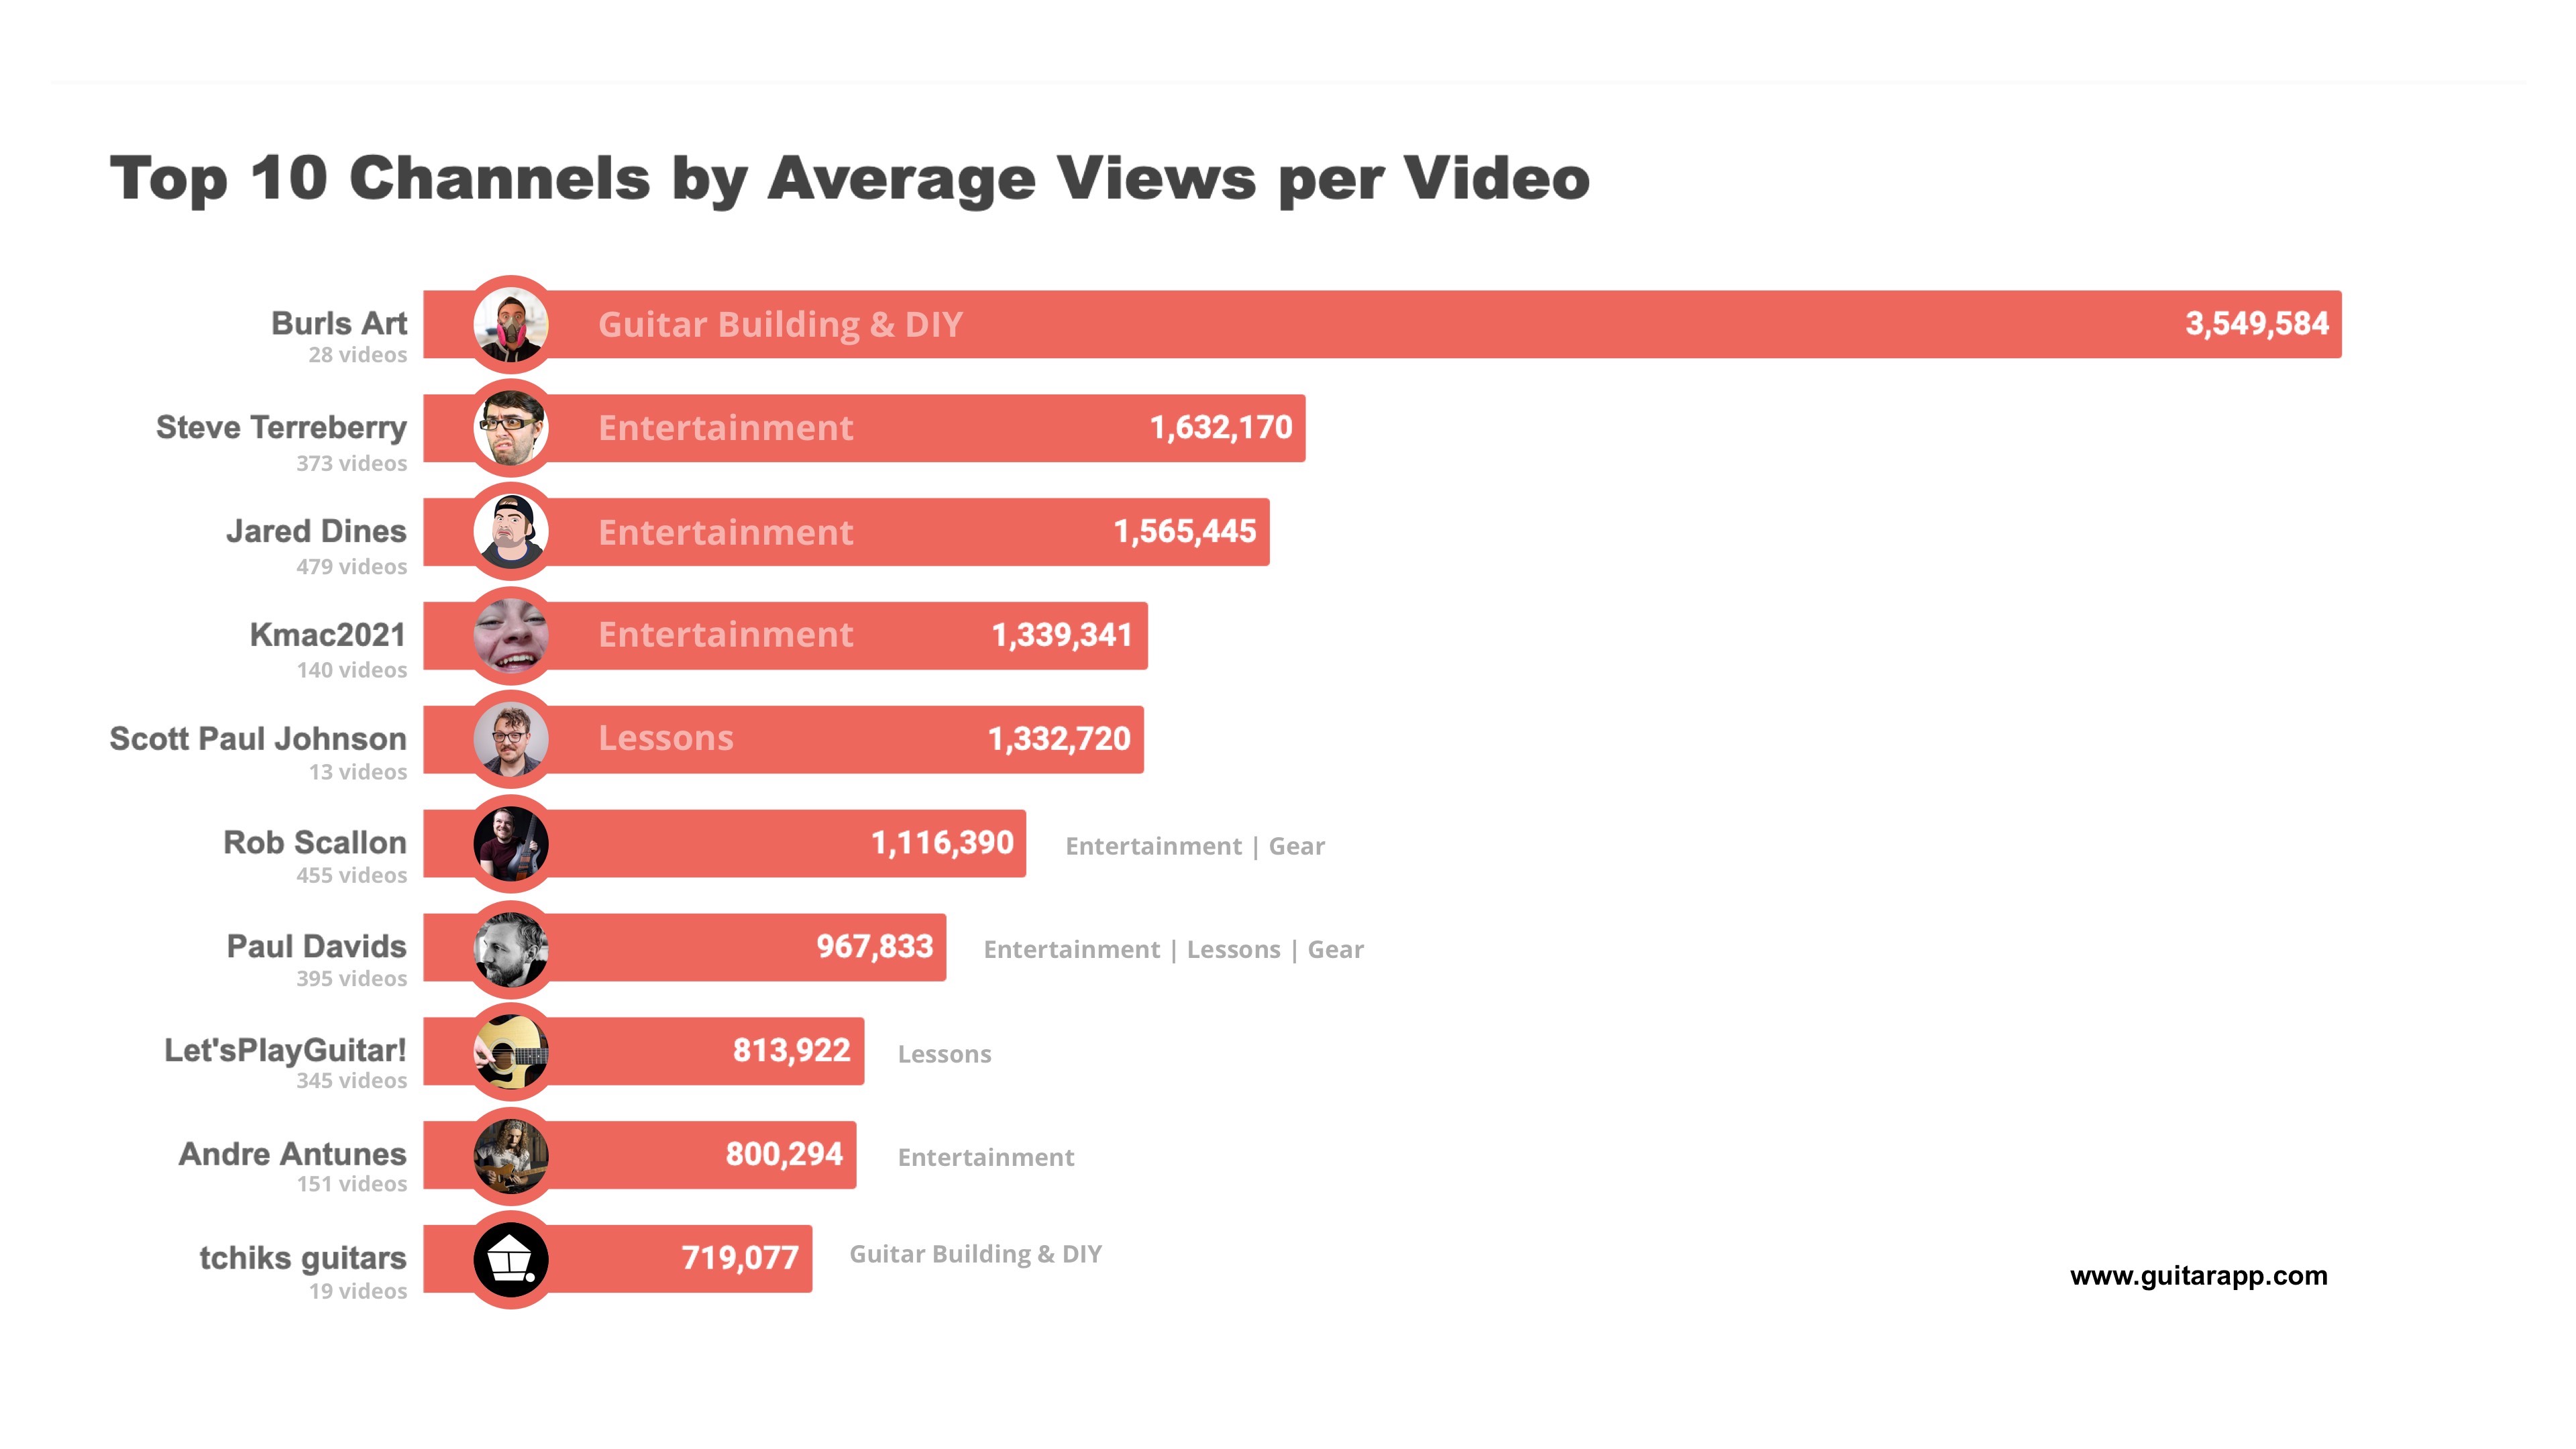 Top 10 YouTube Guitar Channels By Average Views per Video